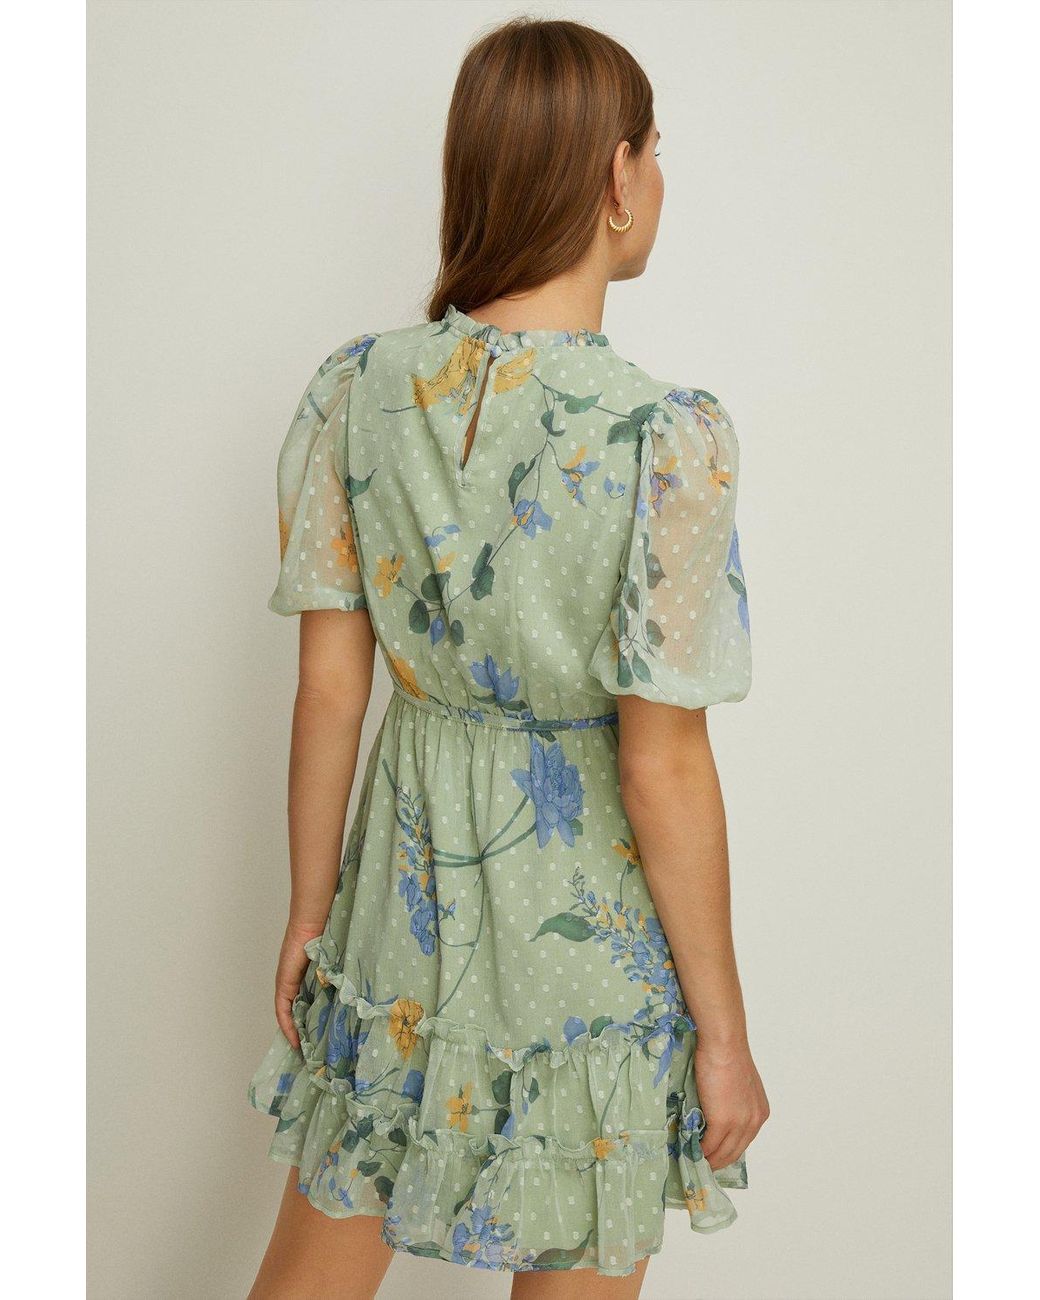 Oasis Petite Lace Trim Dobby Floral Chiffon Skater Dress in Green | Lyst UK